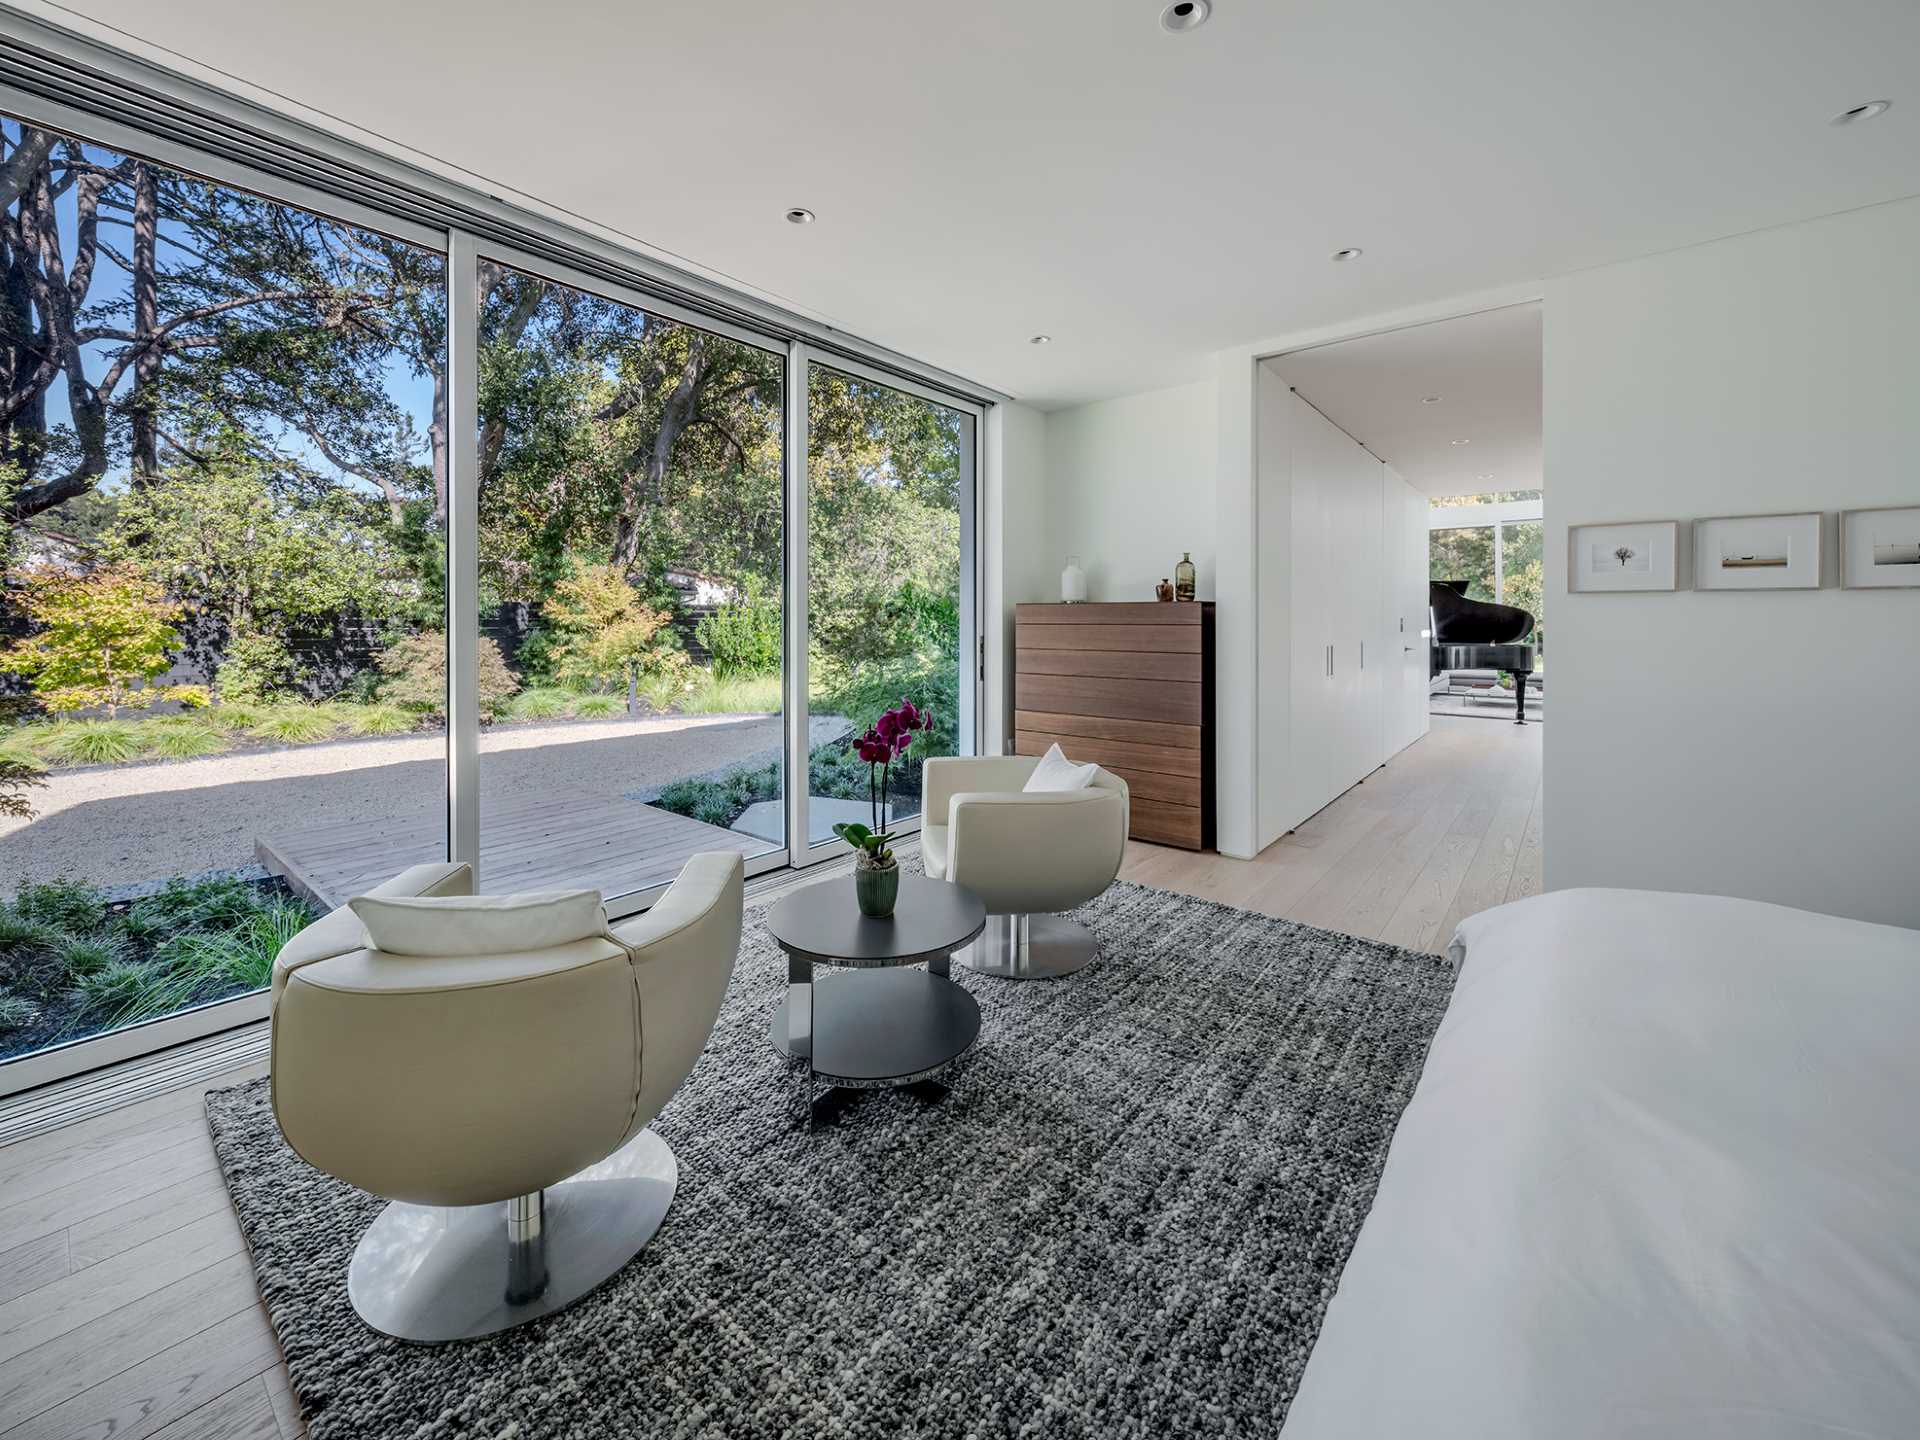 This modern primary suite has a sitting area facing the garden.